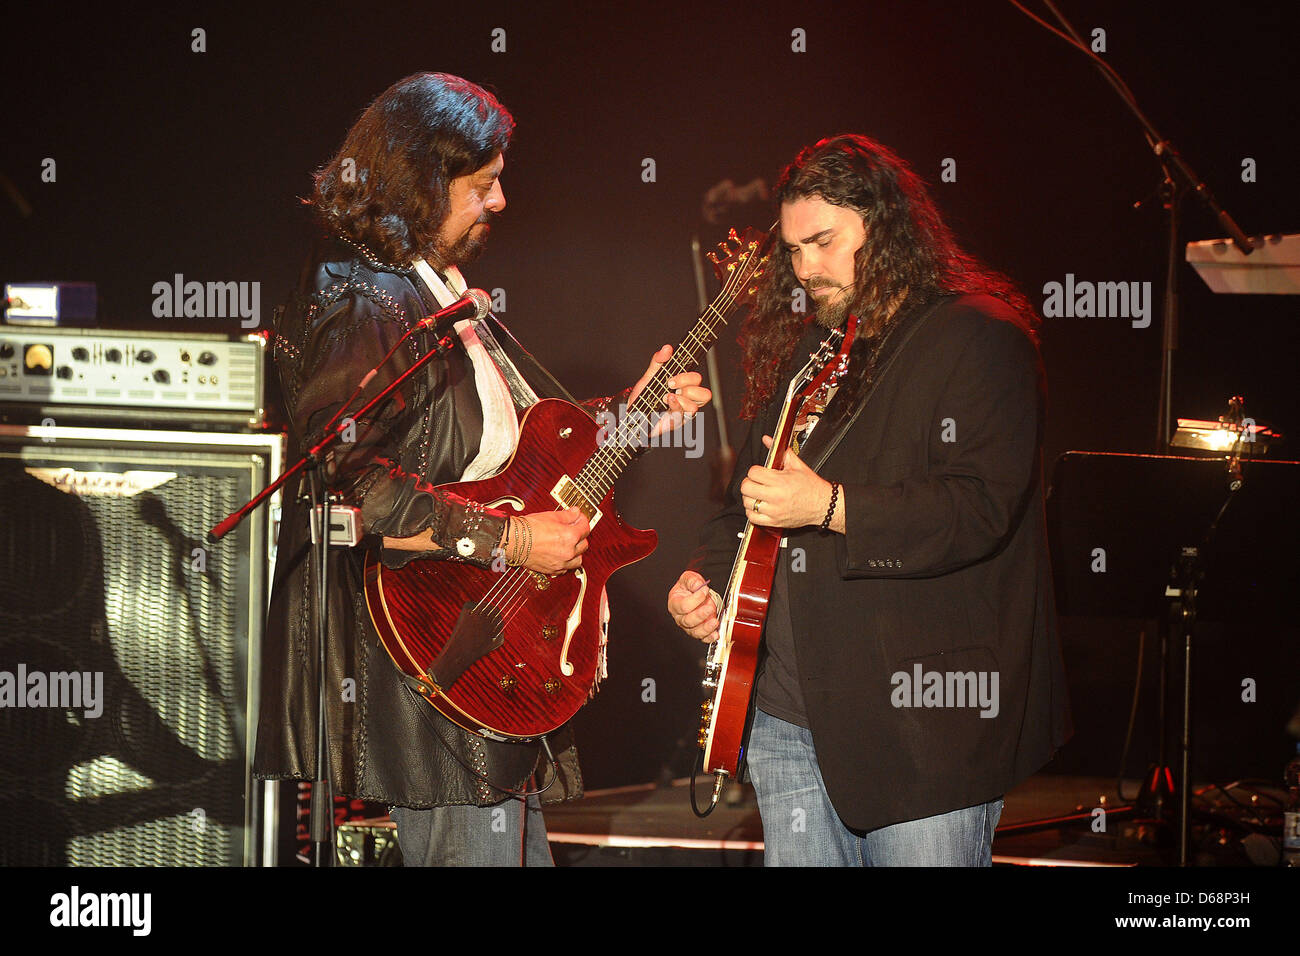 British musician, producer and guitarist Alan Parsons (L) and guitarist Alastair Greene perform on stage during The Alan Parsons Live Project tour 2012 at Circus Krone in Munich, Germany, 19 July 2012. Photo: Revierfoto Stock Photo